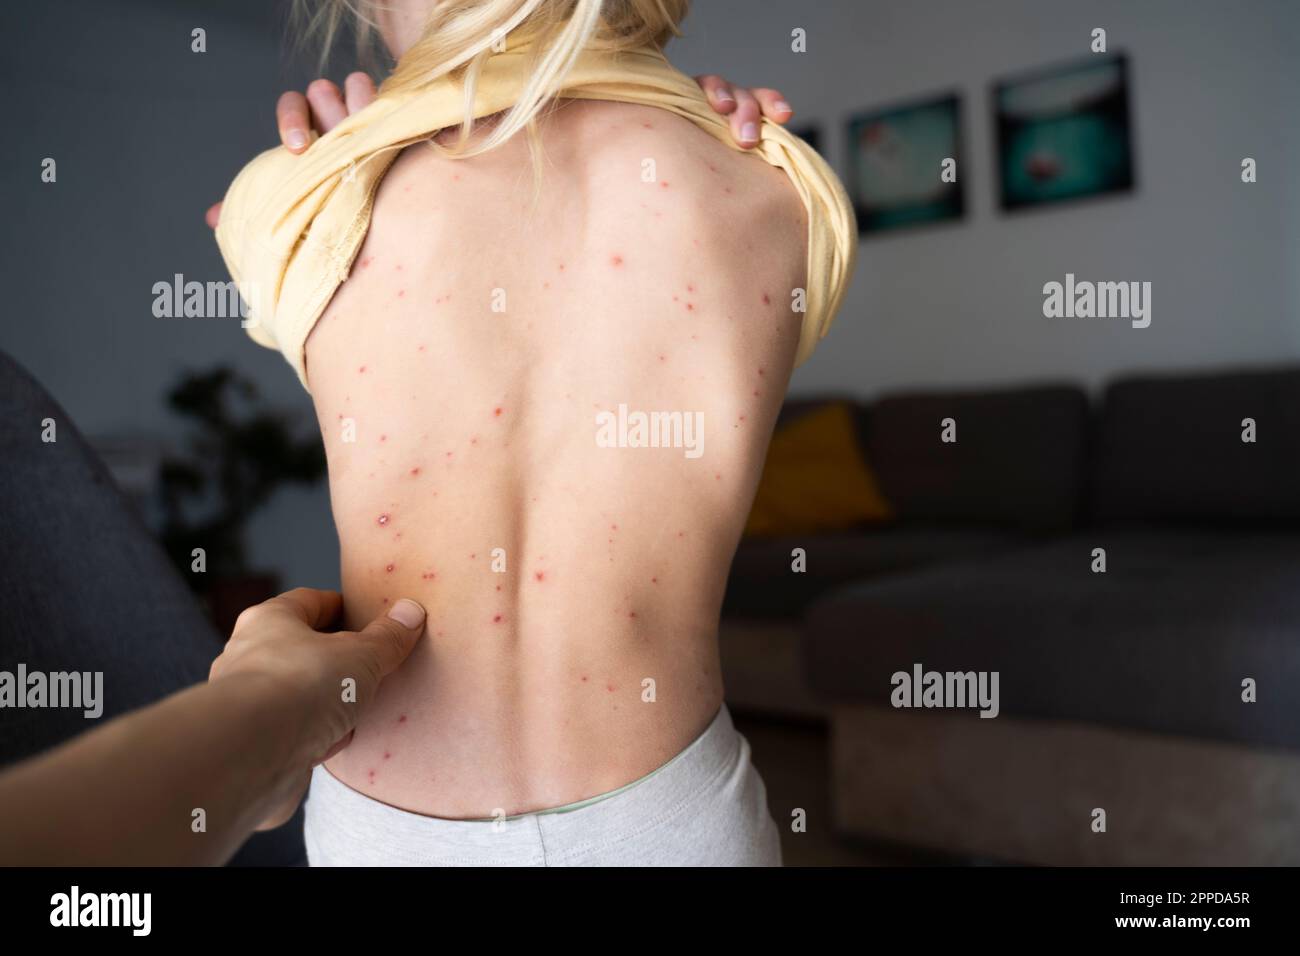 Woman touching back of girl with chickenpox Stock Photo